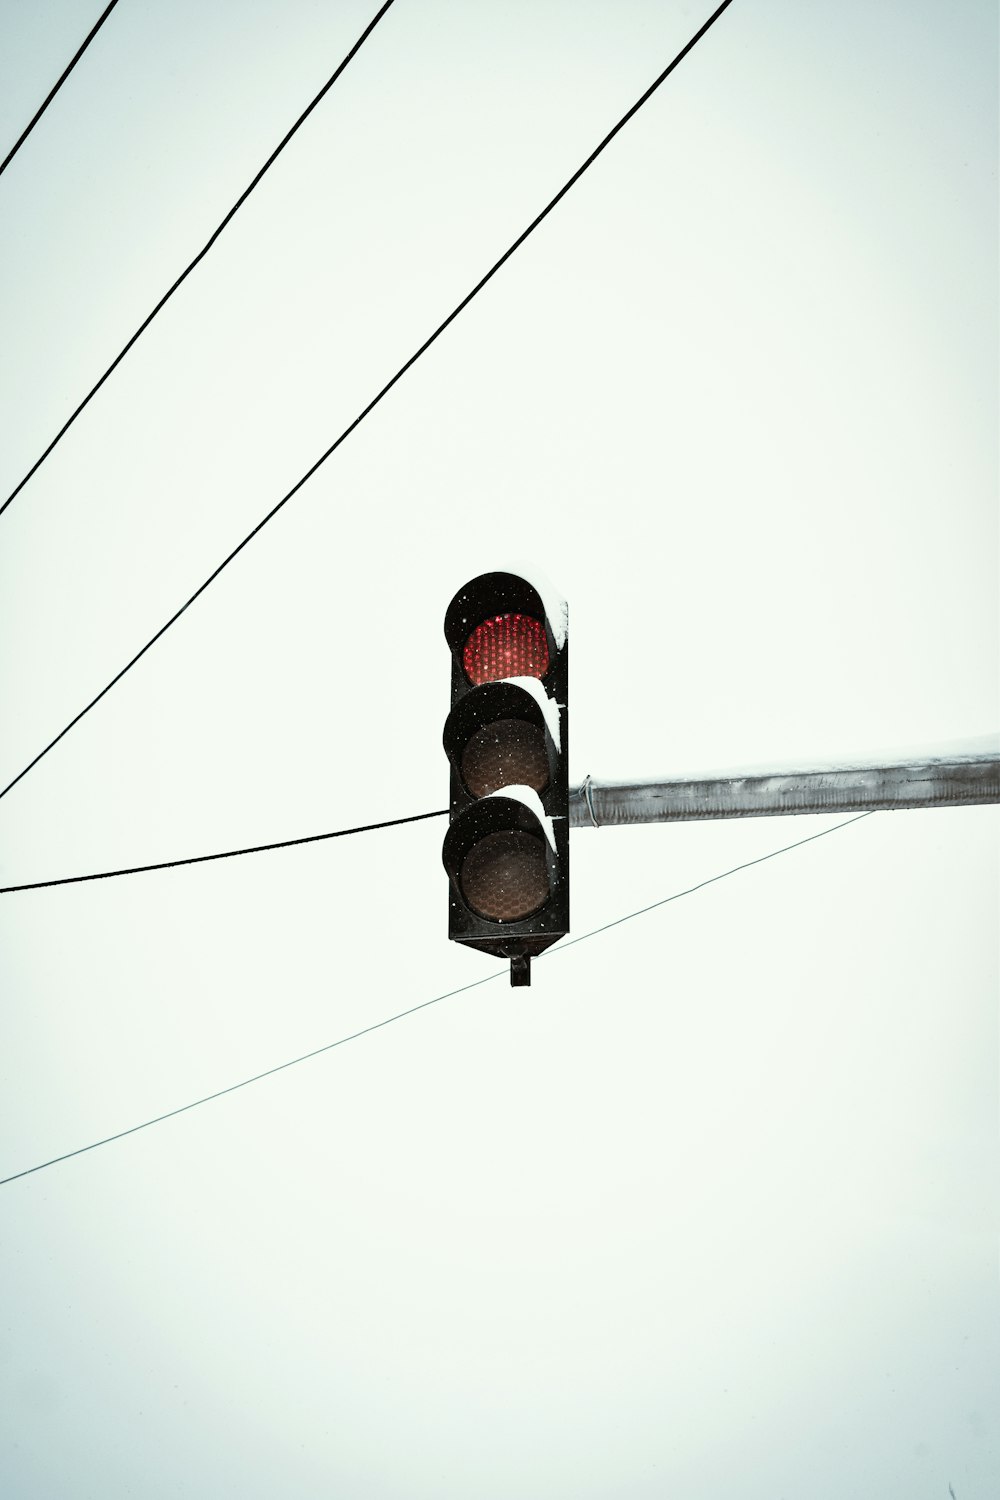 a traffic light hanging from a metal pole